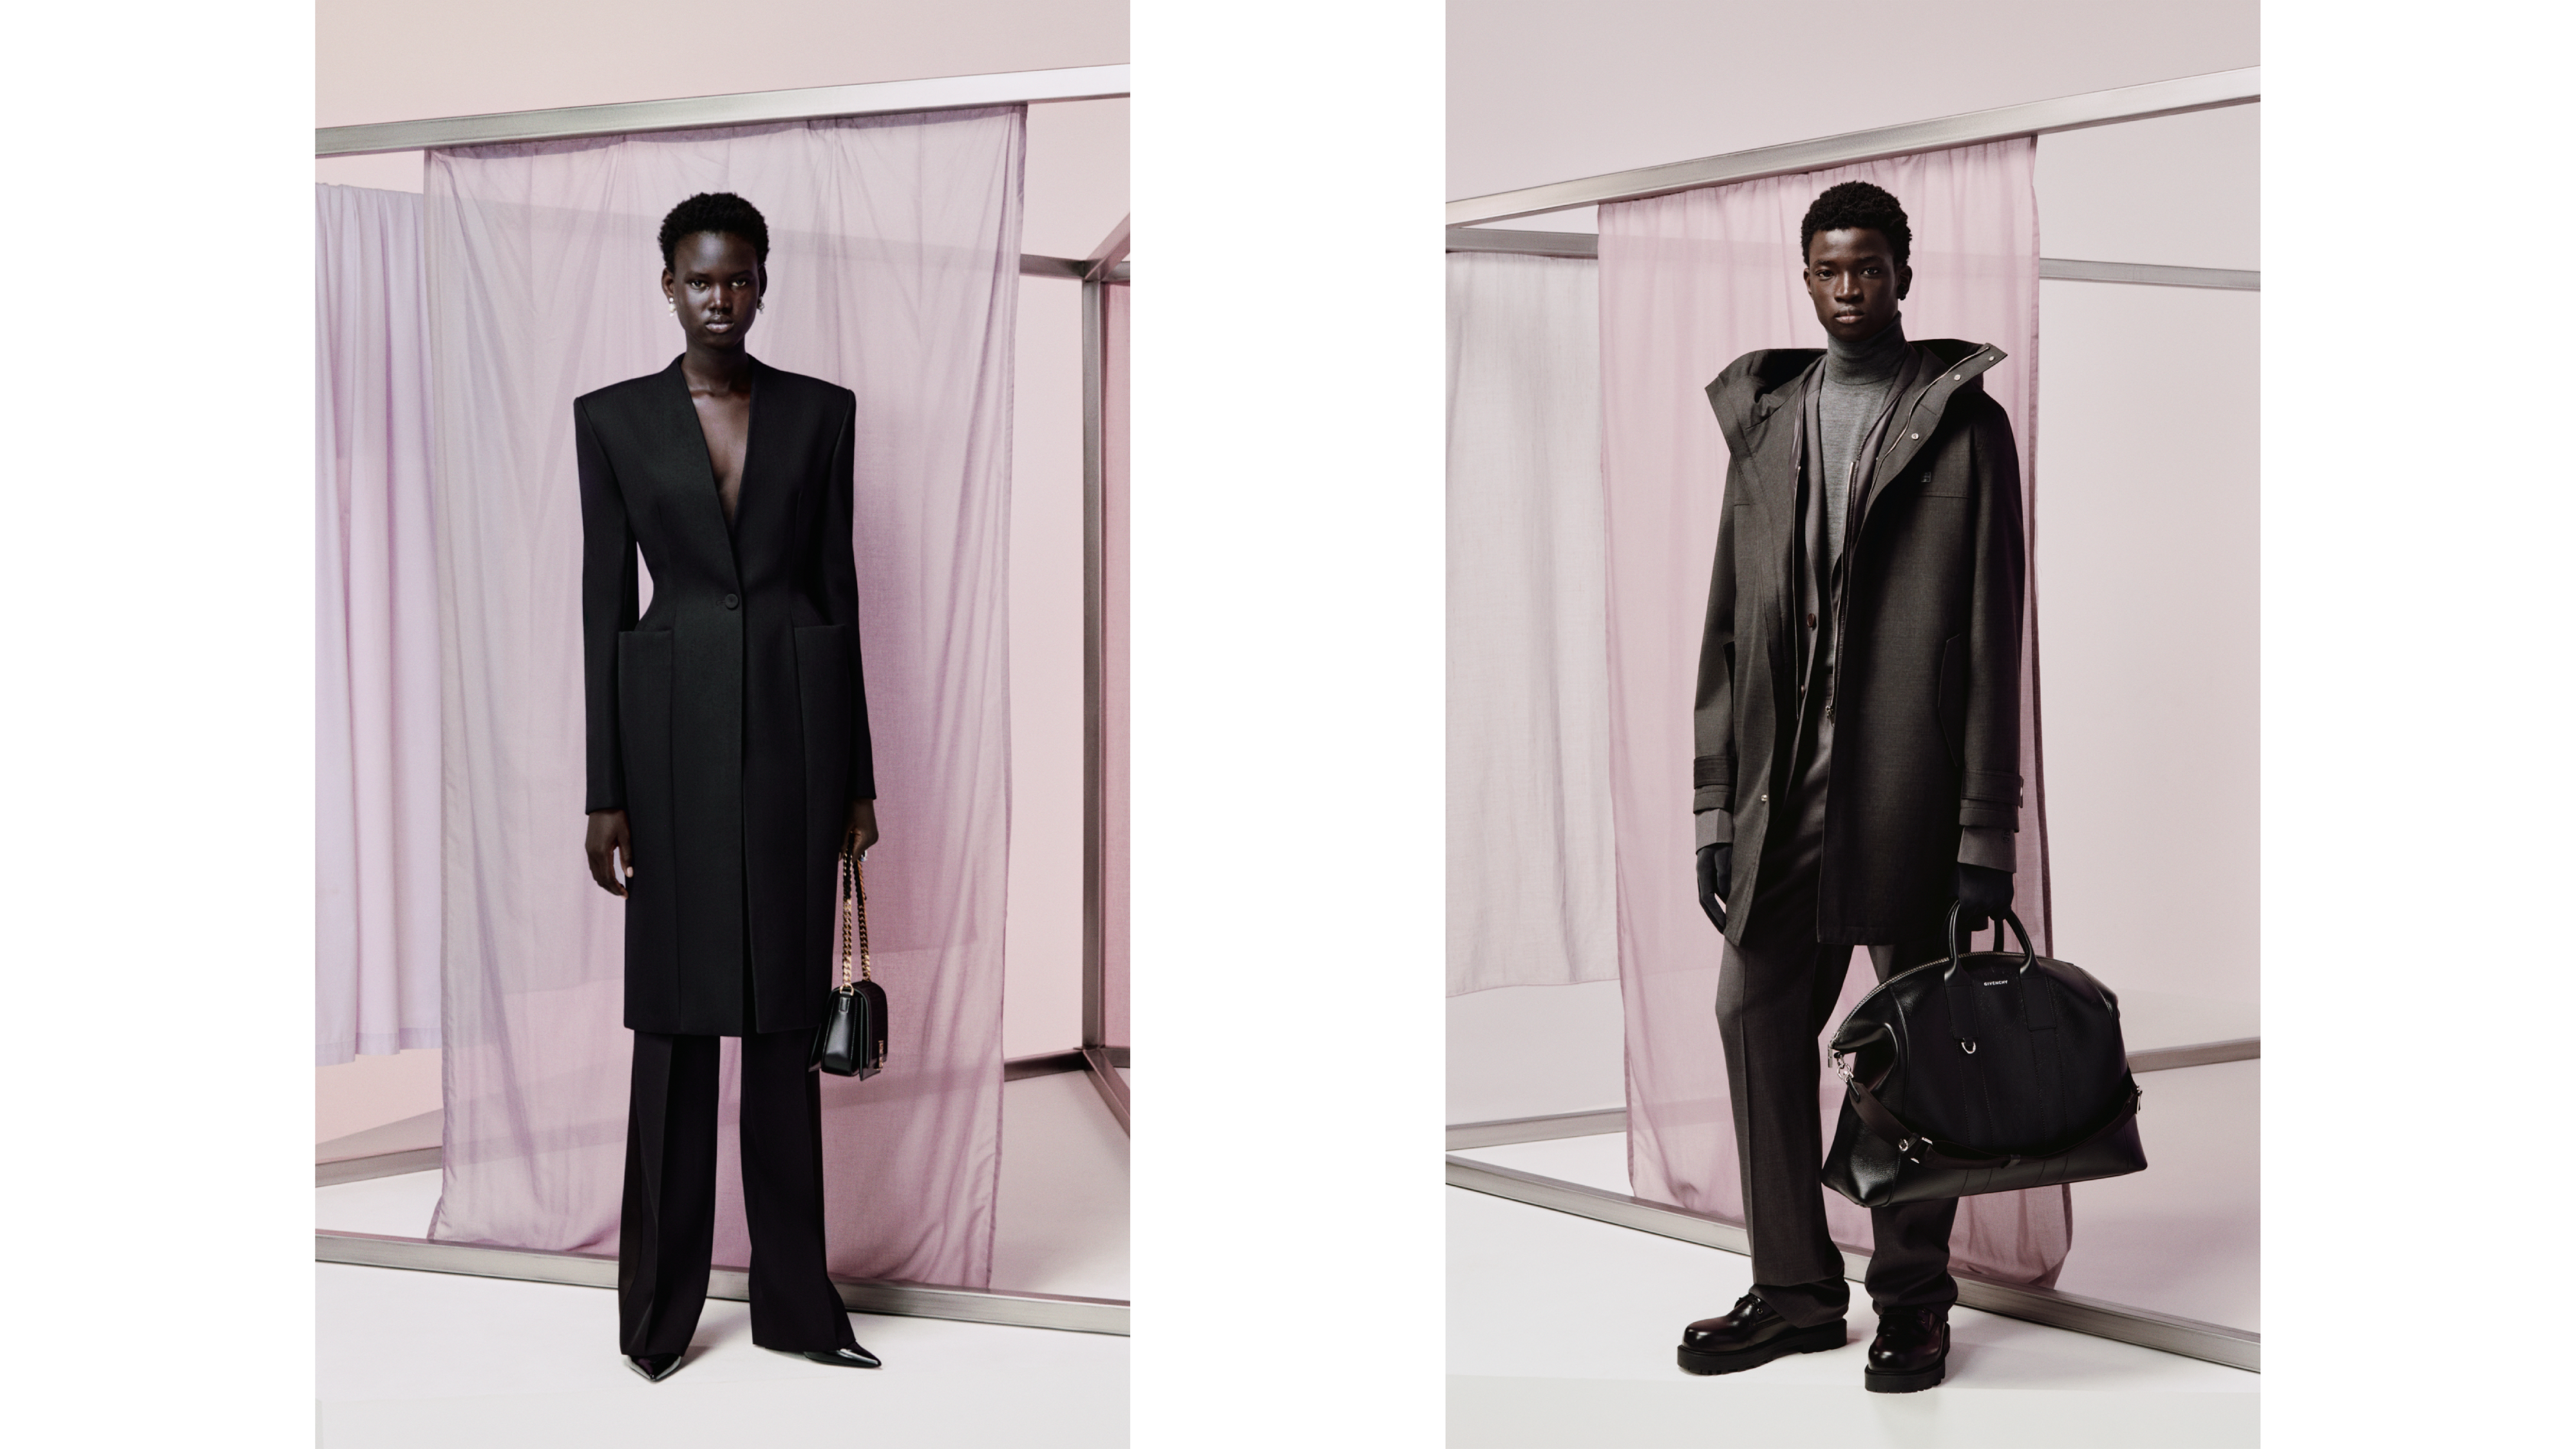 https://www.givenchy.com/coremedia/resource/blob/1084450/8c5f276dbe823dc3cc6c19cc478506d6/givenchy-preco-spring24-banner-data.png